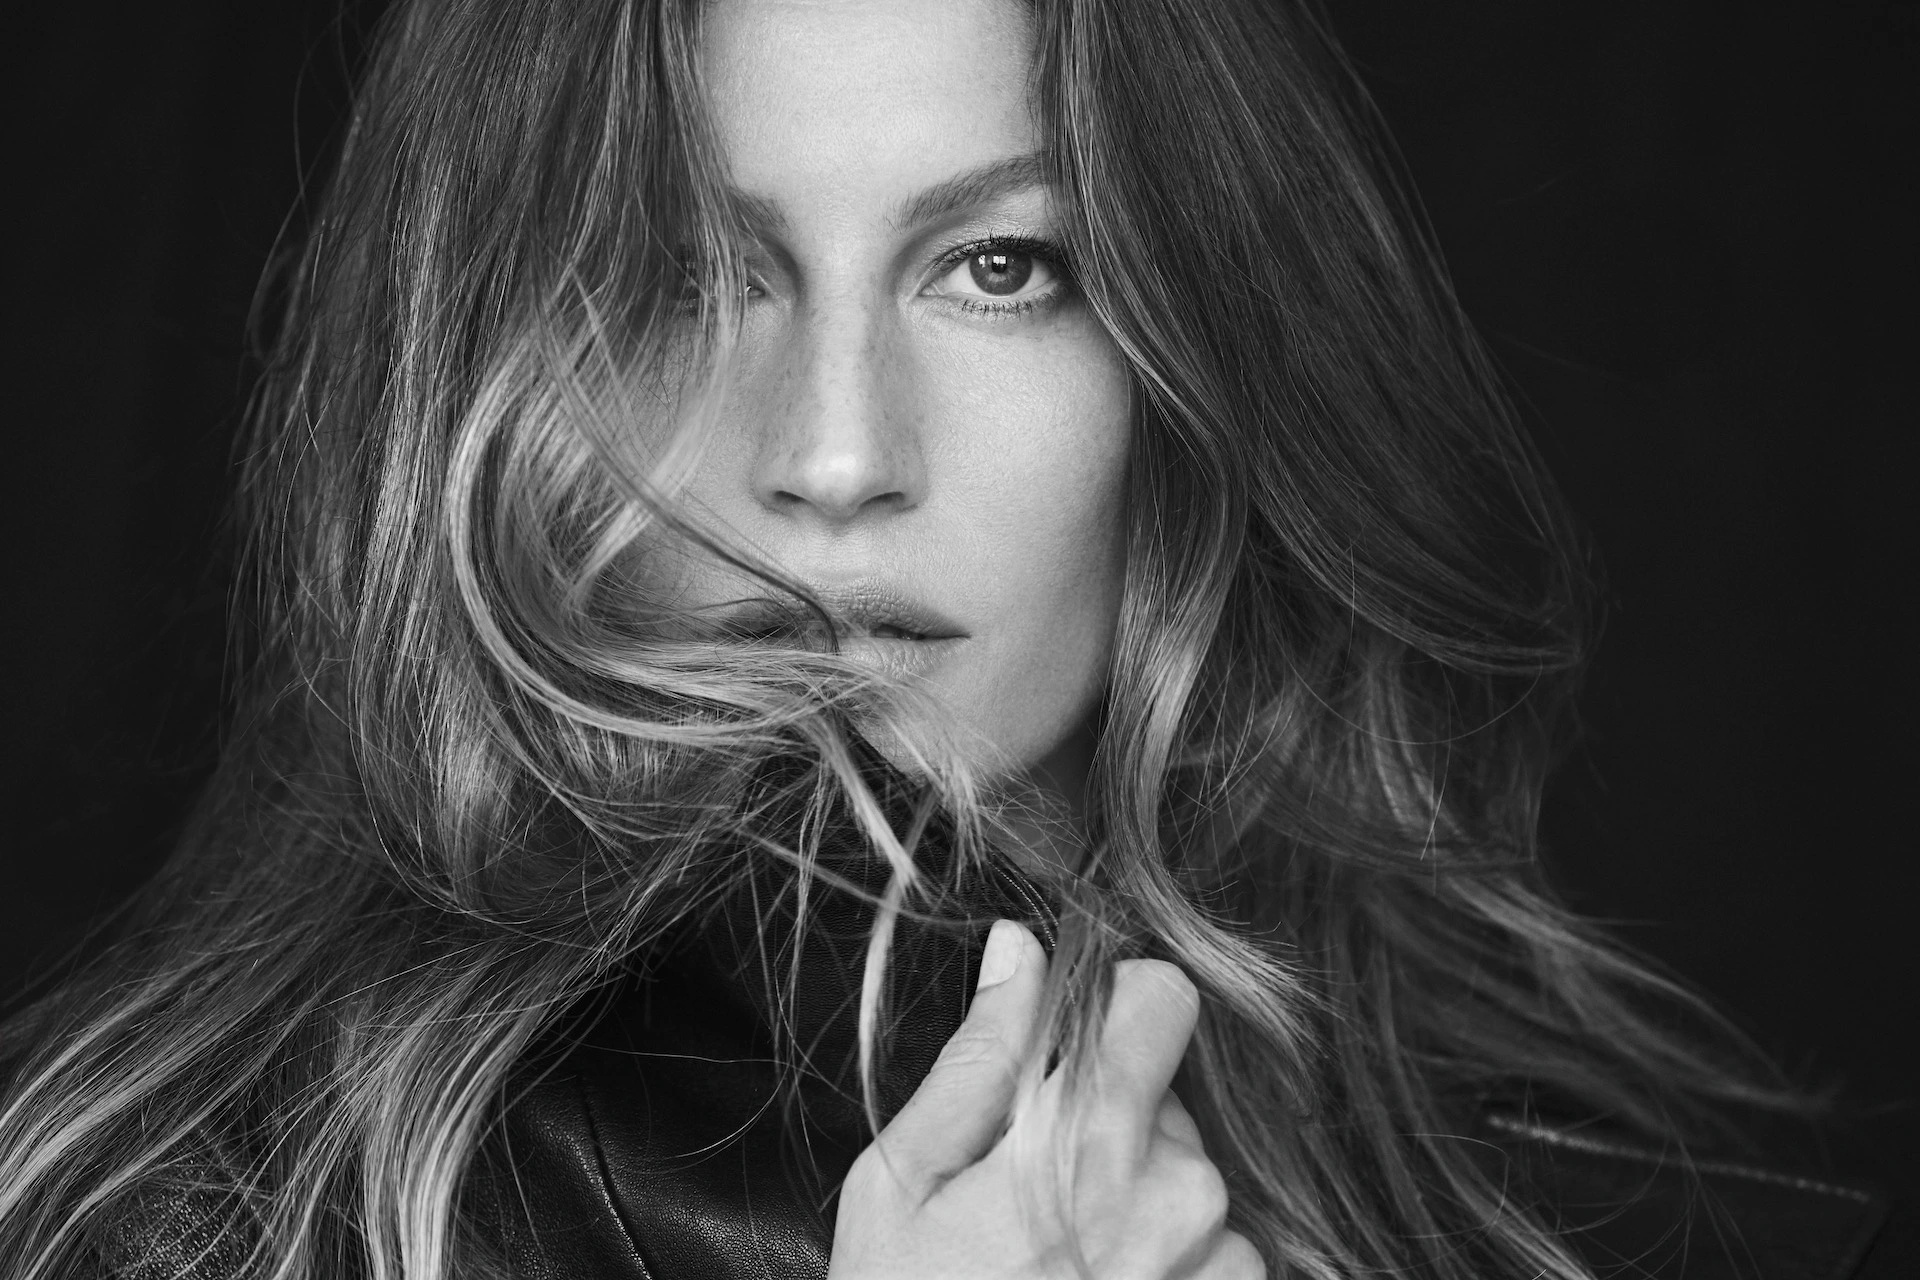 Gisele Bundchen, CAA fashion deal, New contract, Exciting opportunities, 1920x1280 HD Desktop